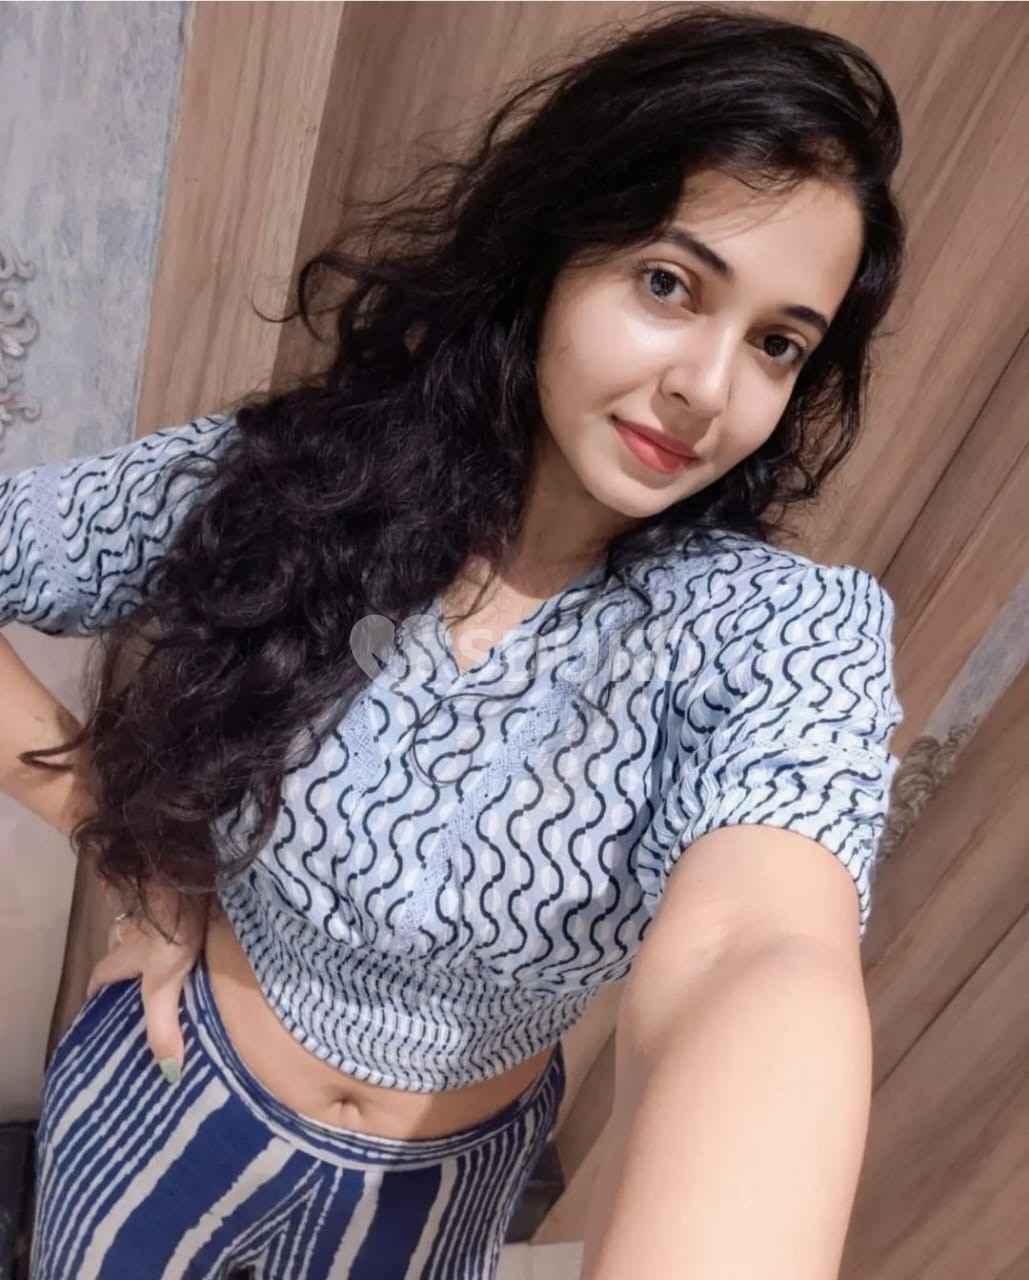 Call girl in Bangalore self and safe secure high profile girl available anytime